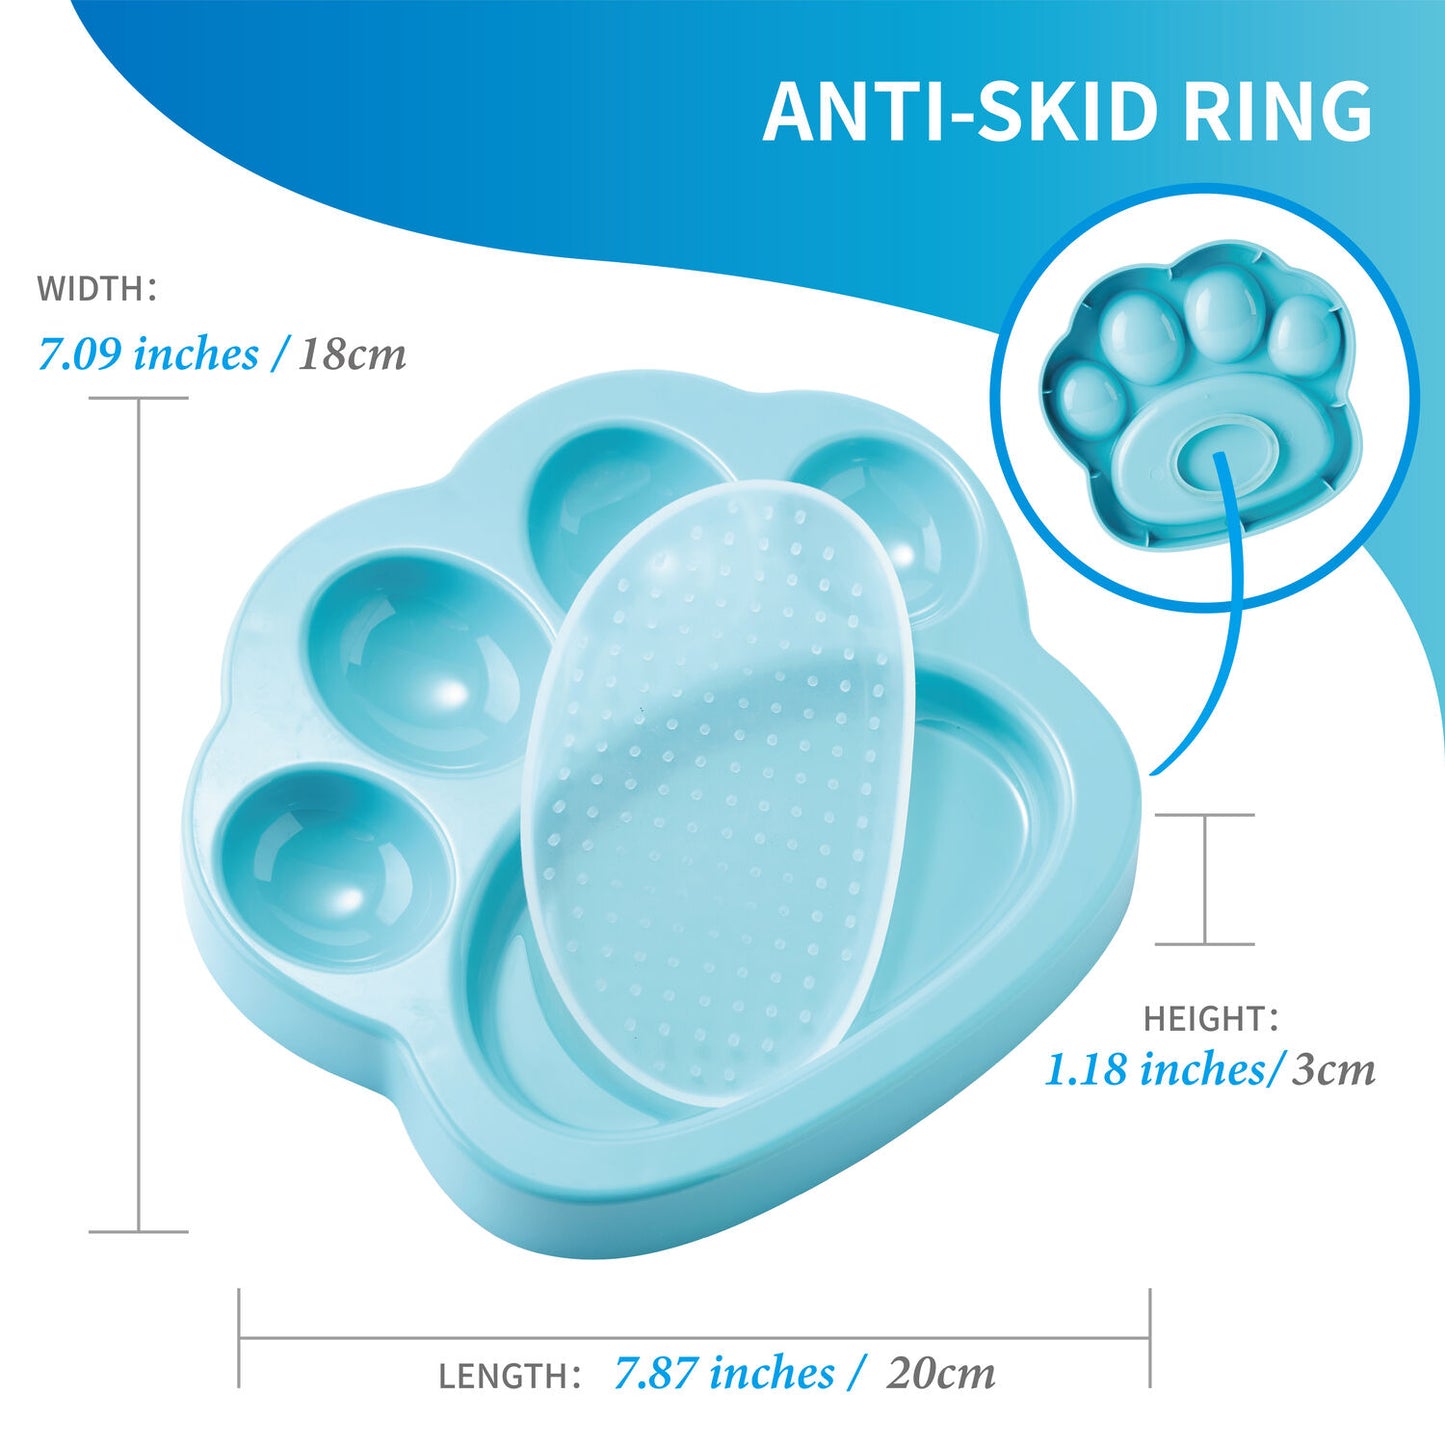 PAW 2-IN-1 Mini Slow Feeder & Lick Pad - Blue (Easy)